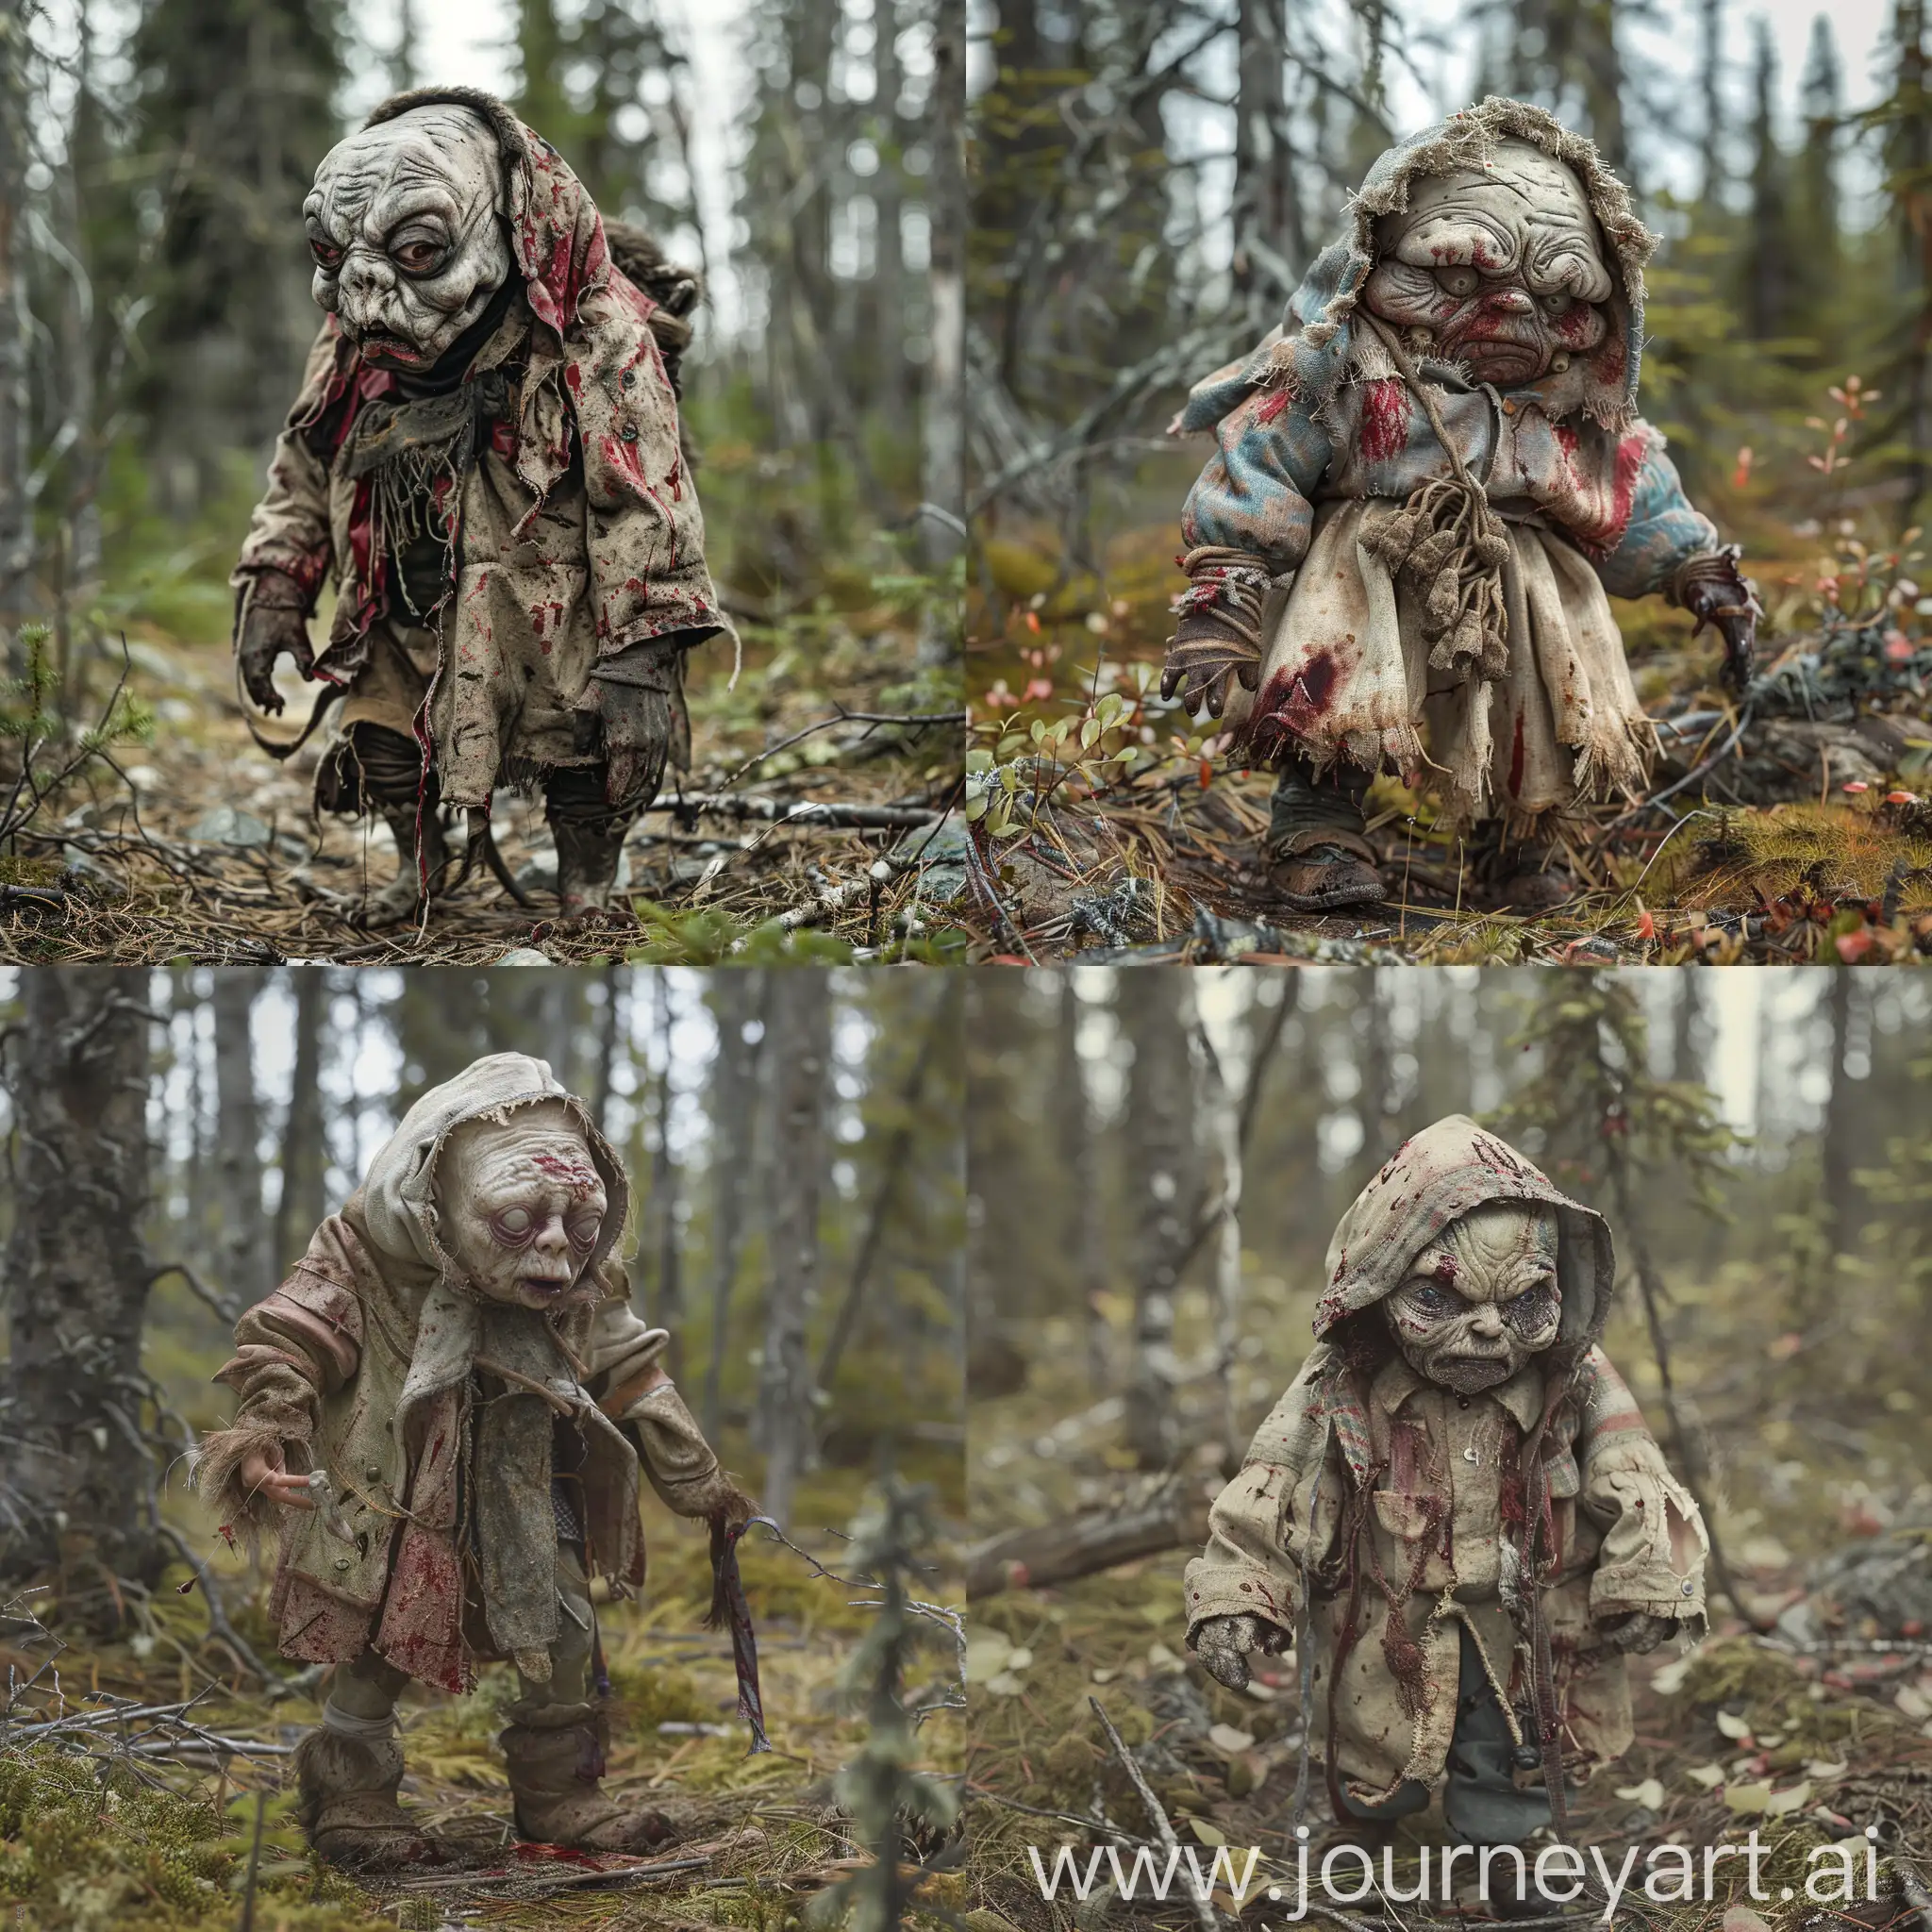 A terrifying small hunchbacked creature with a pale and deformed face, eyeless and beastly, wearing Eskimo clothes in a forest in the Arctic tundra. The clothing is old and stained with blood. It is 4 o'clock in the afternoon. full shot, full bory  –ar 3:4